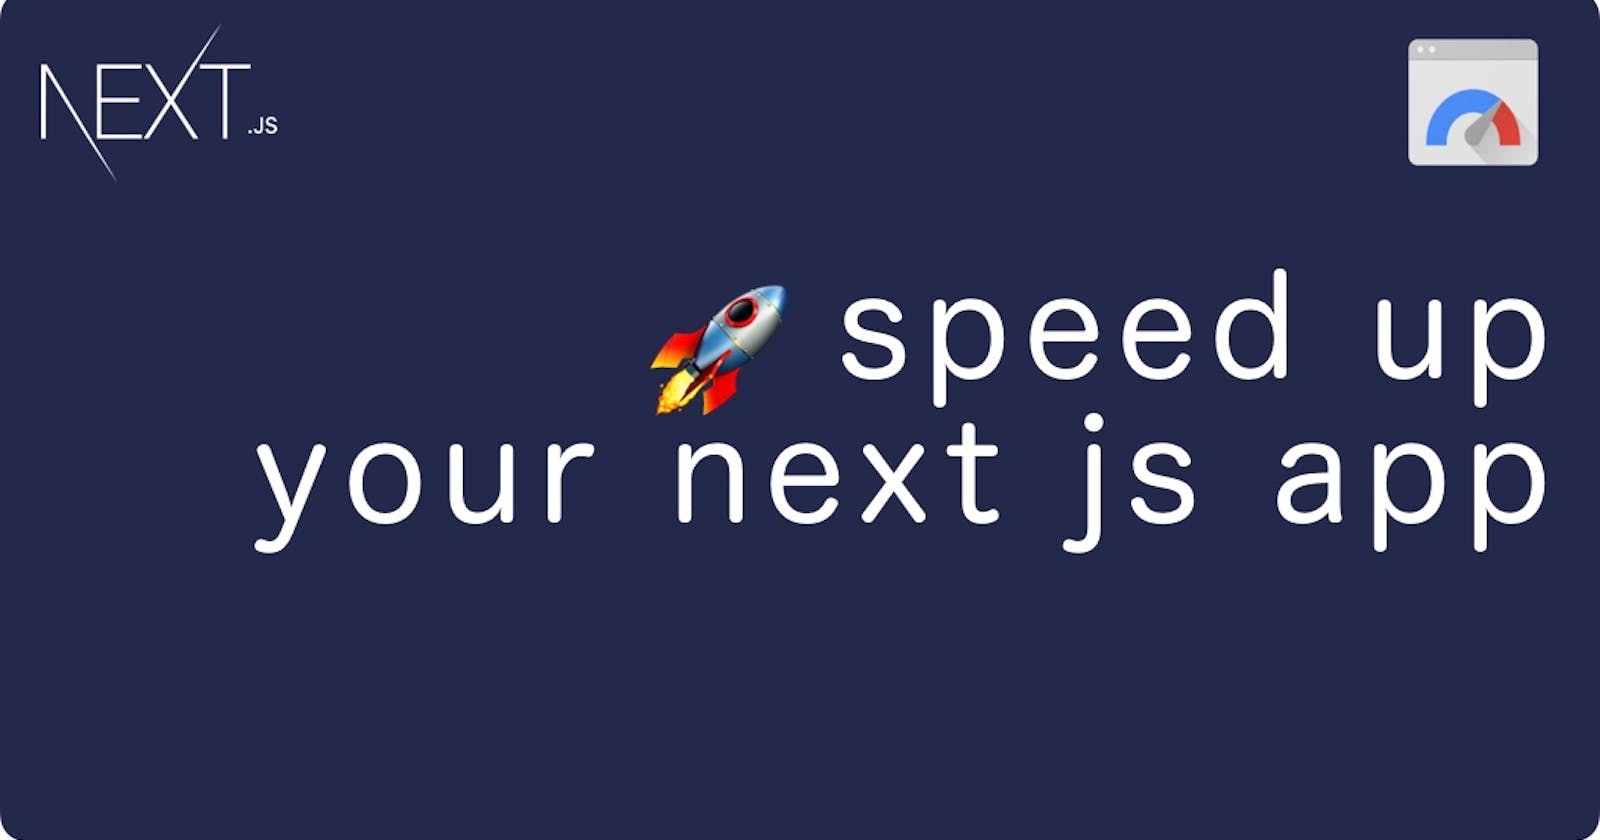 How to speed up your next js app using GZip